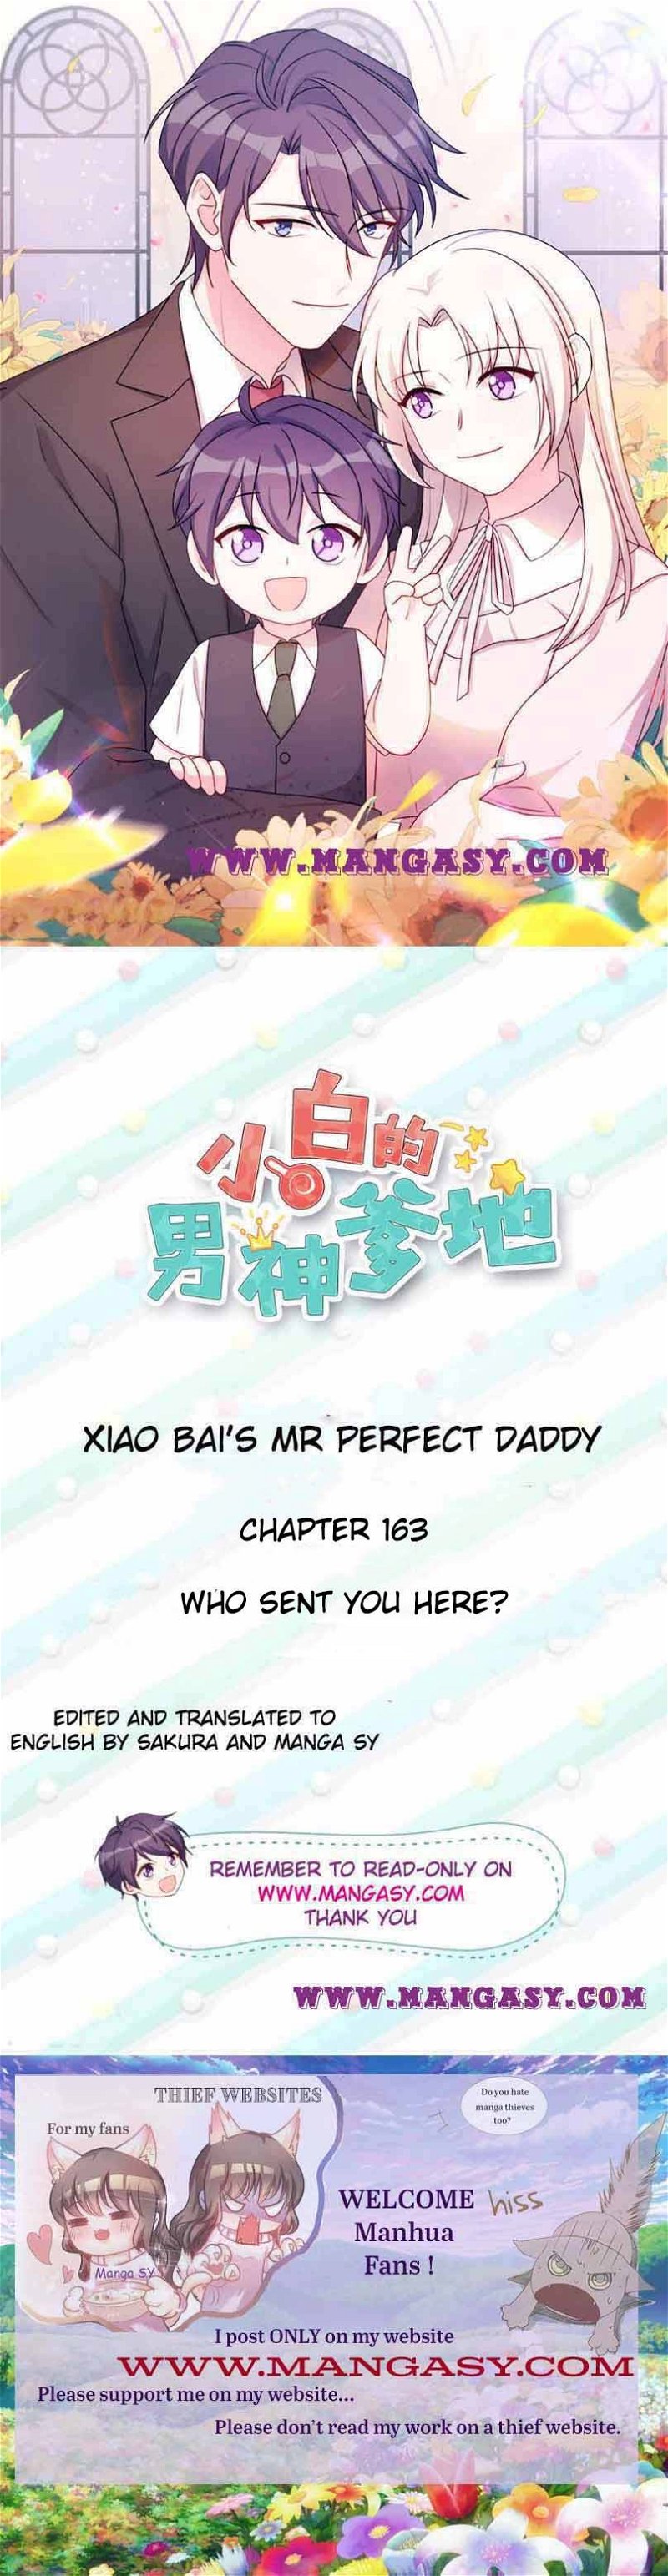 Xiao Bai’s father is a wonderful person Chapter 163 - Page 0